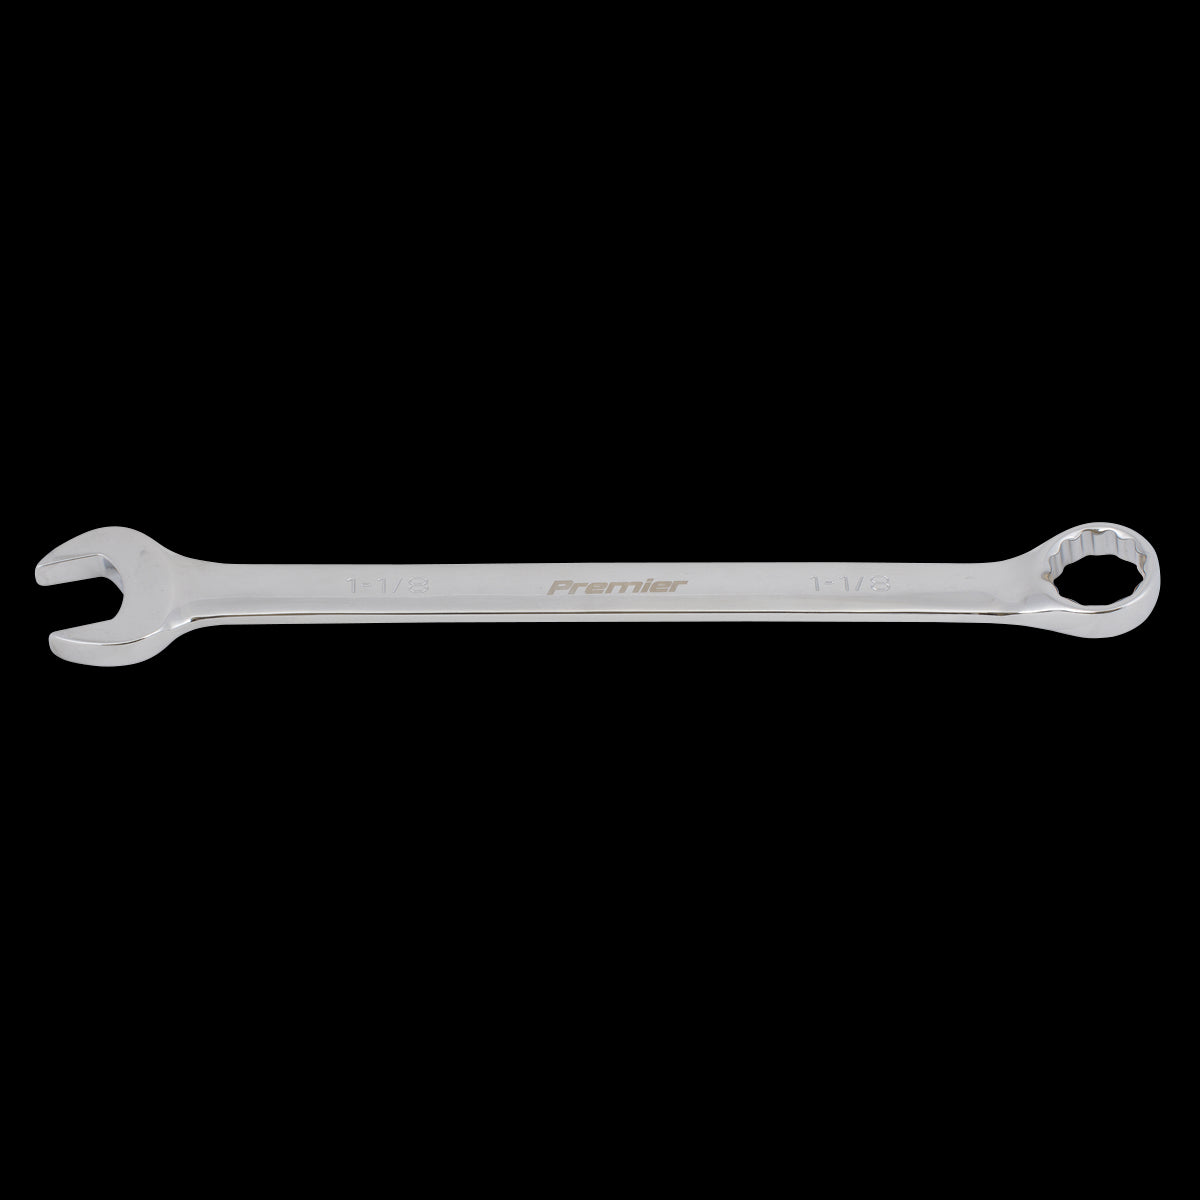 Sealey Premier Combination Spanner 1-1/8" - Imperial